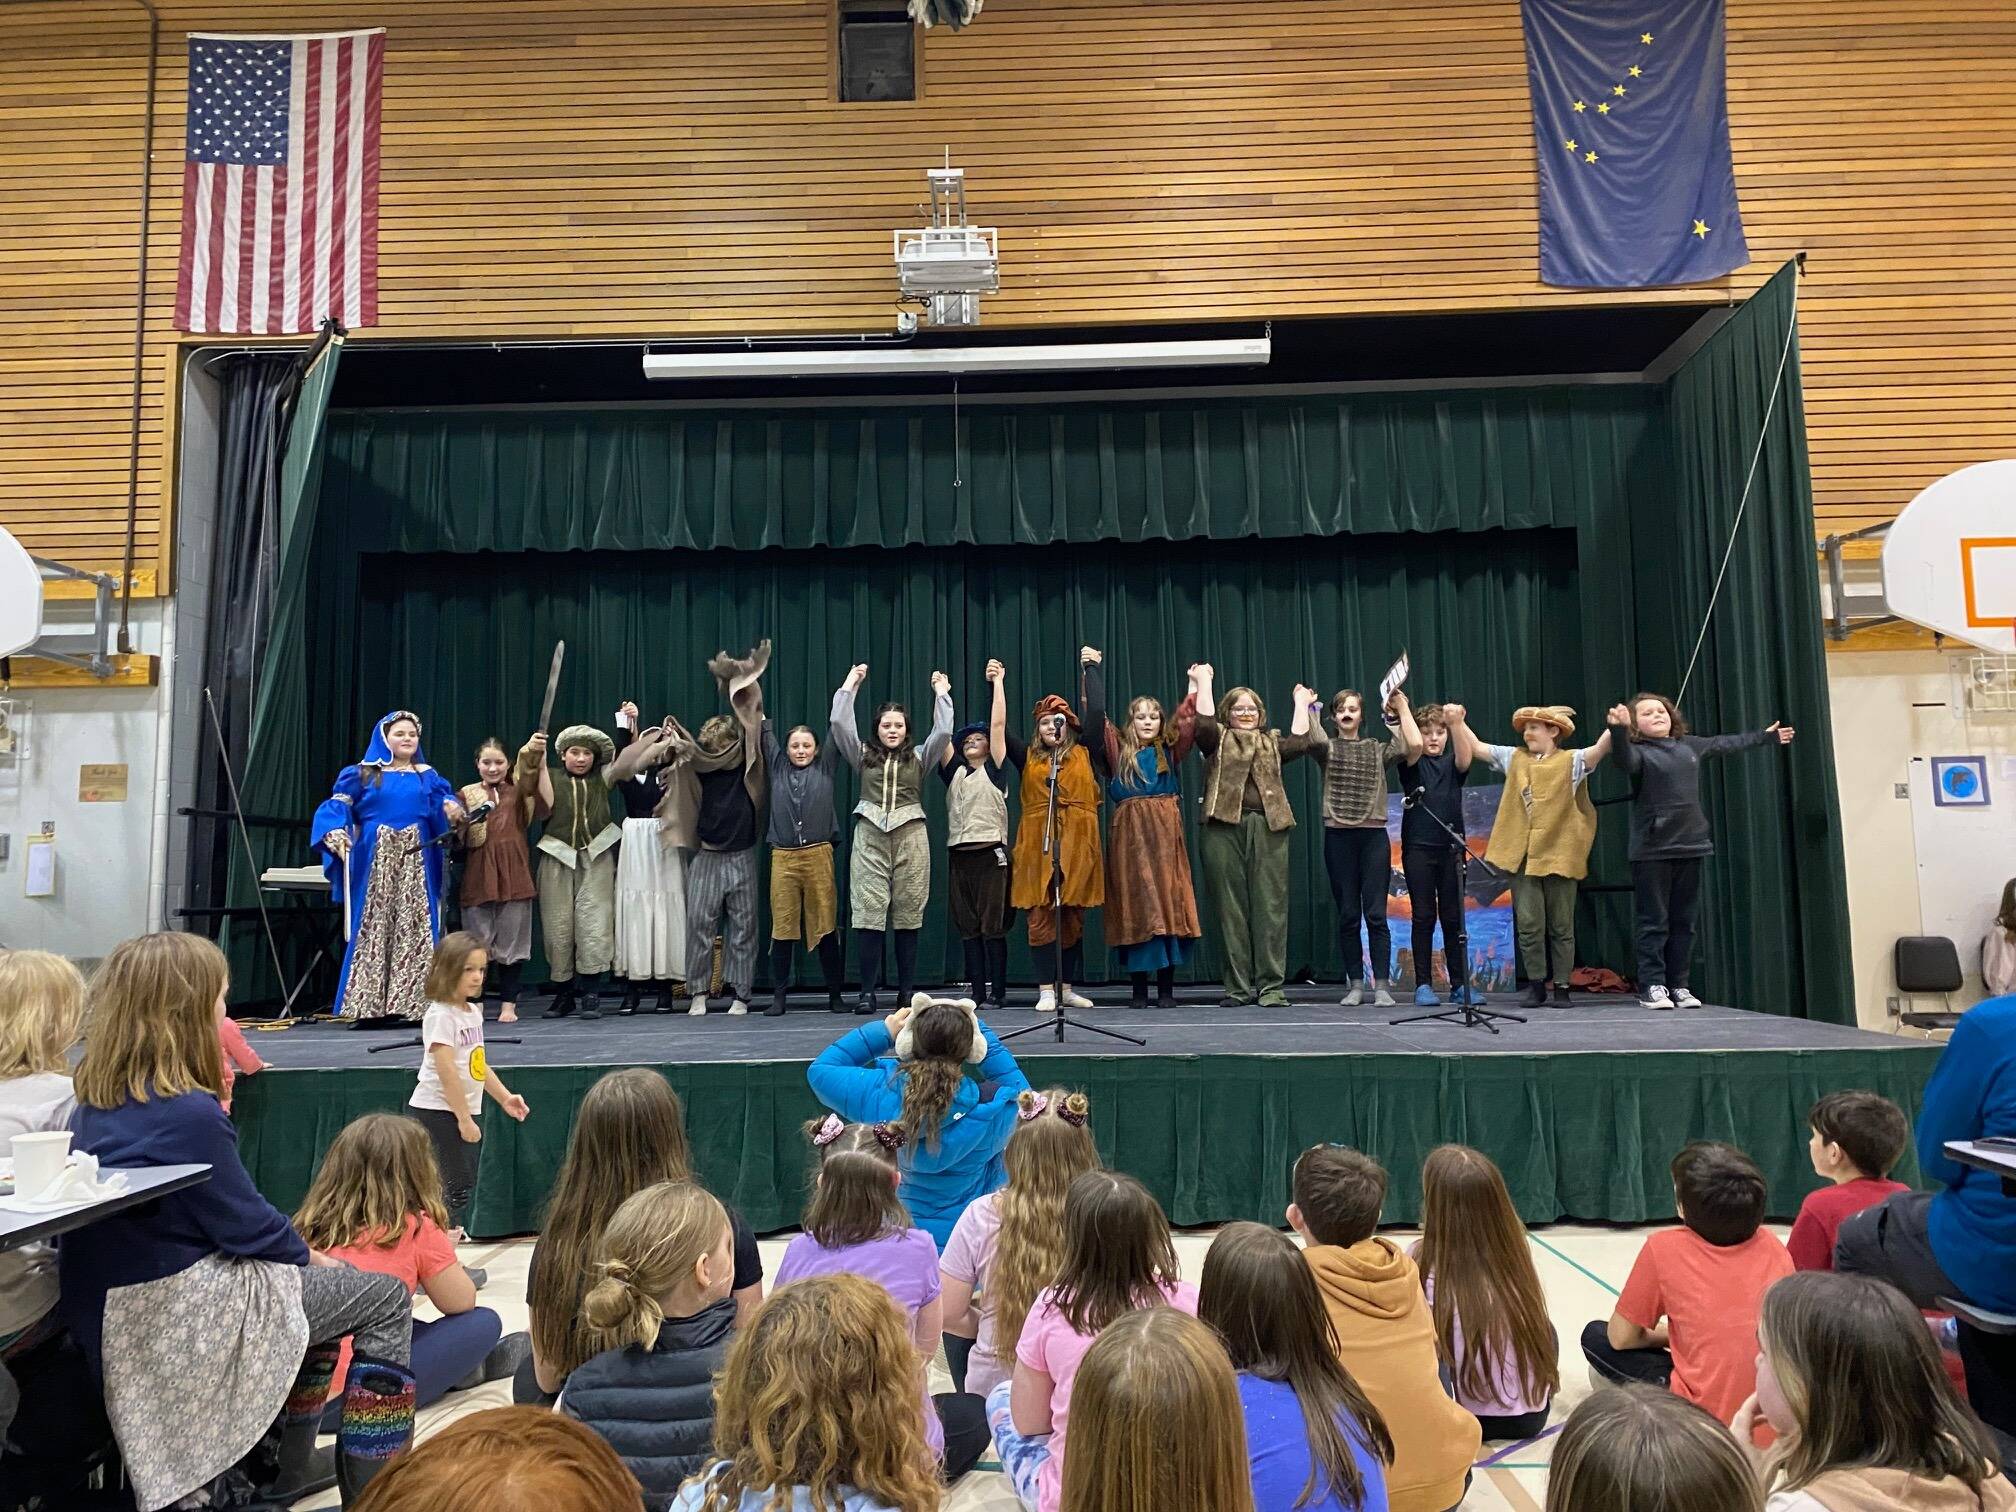 West Homer Elementary Shakespeare Club on March 30, 2023, in Homer, Alaska. (Photo provided by Sarah Brewer )